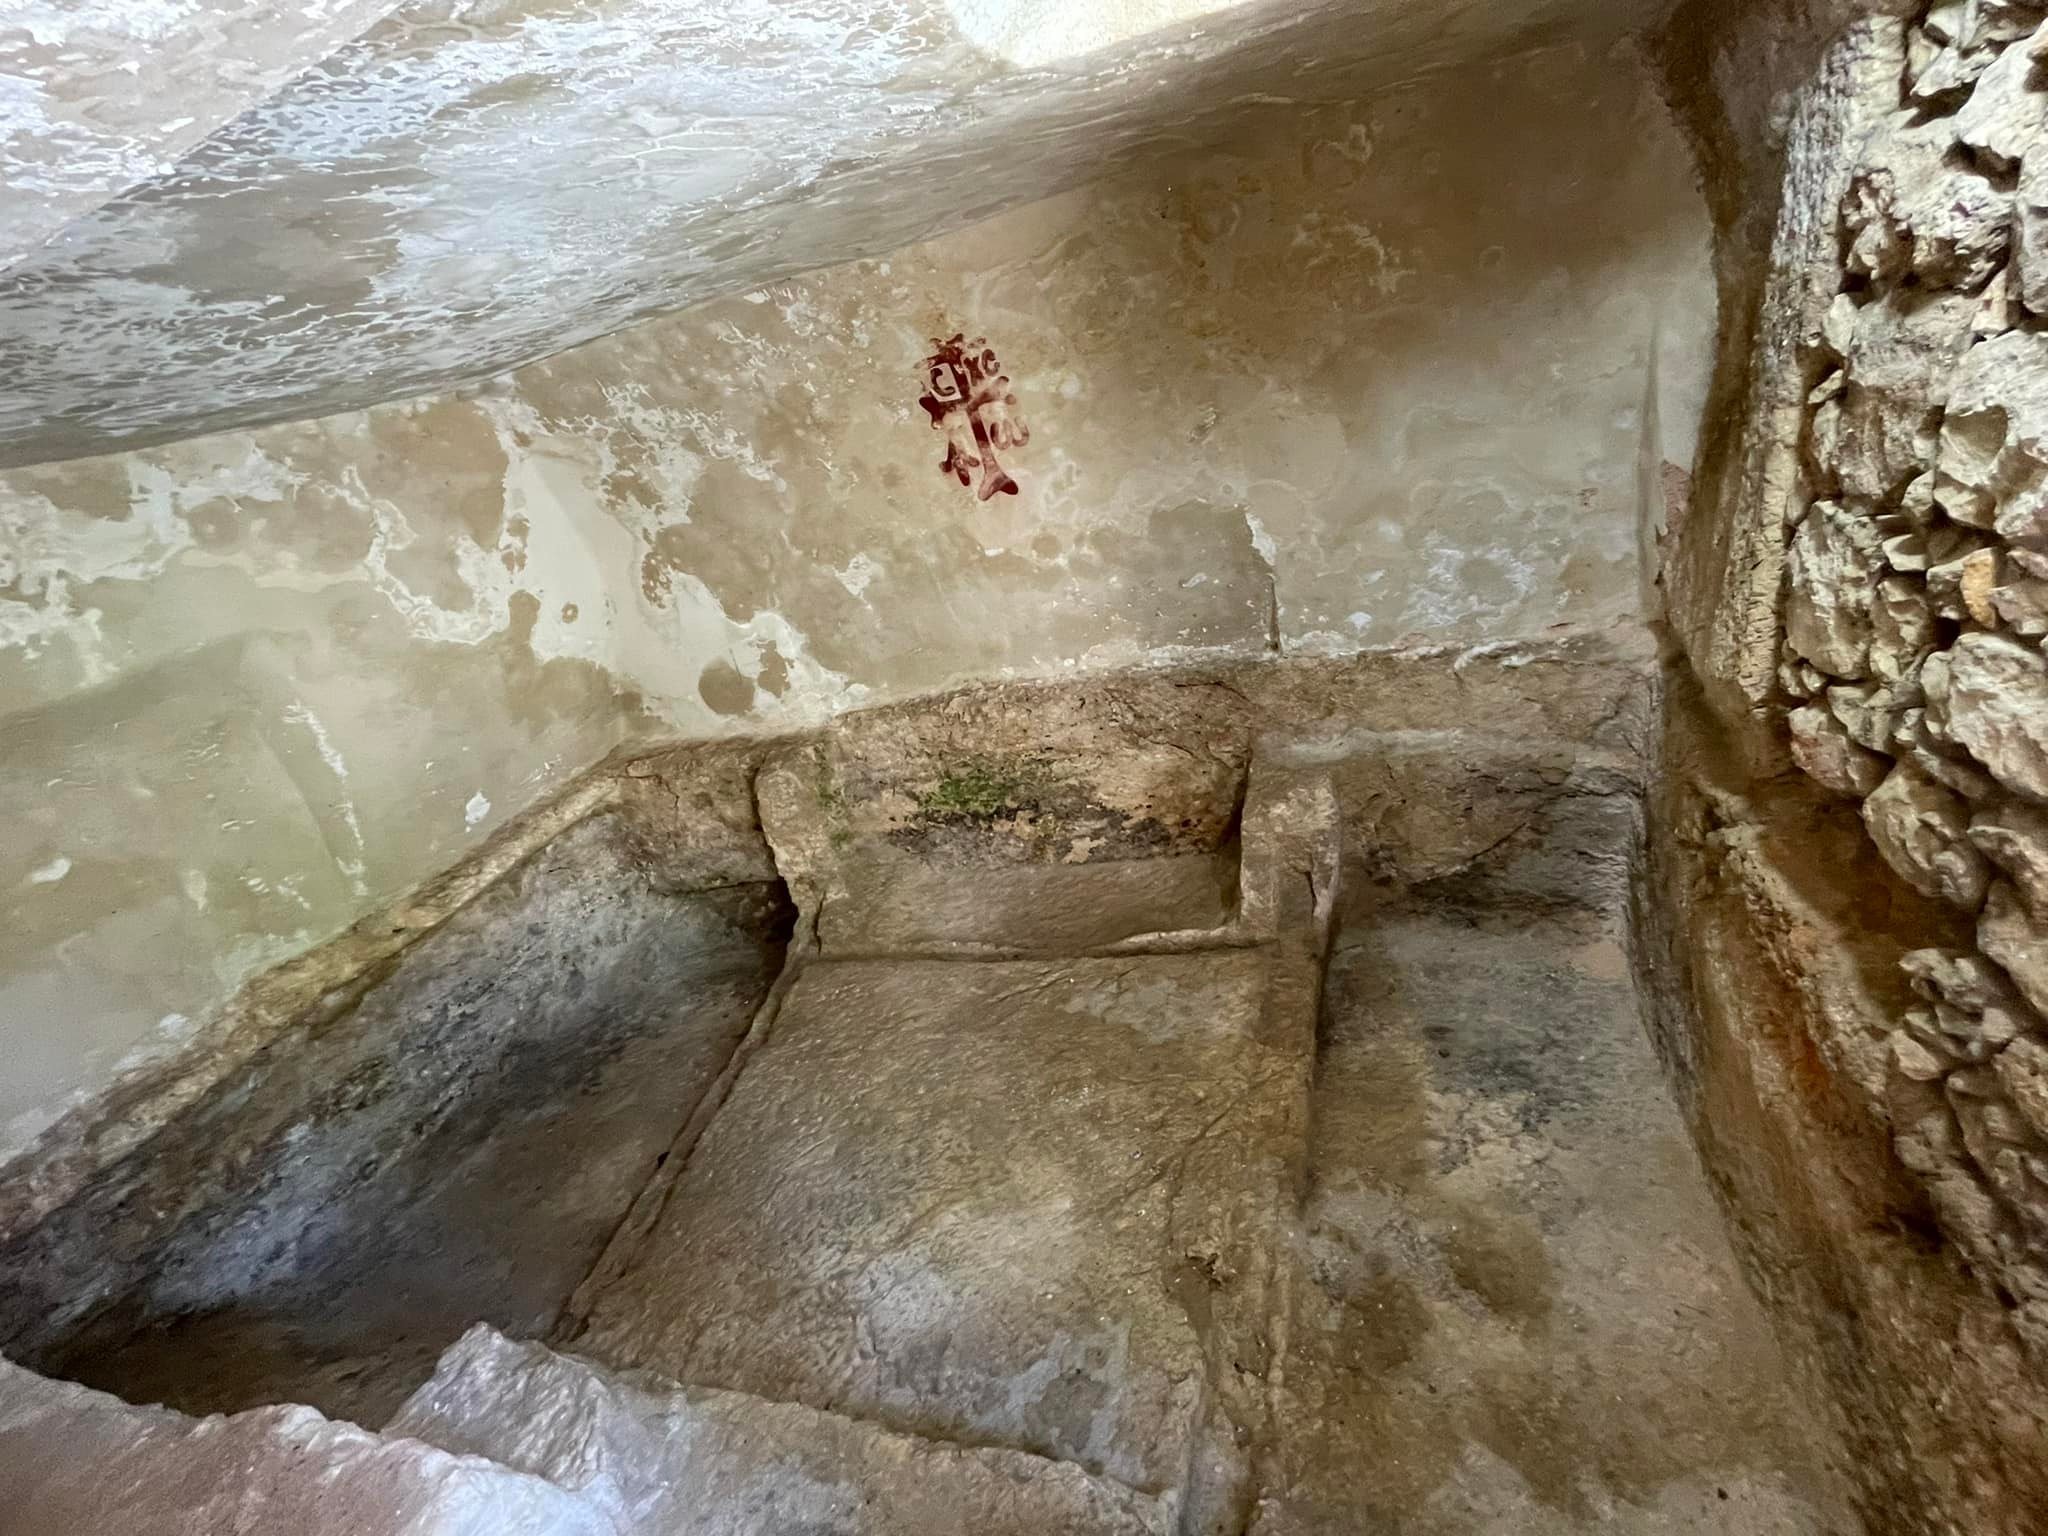  There are actually two chambers, I’m standing in the first chamber where the body would have been anointed. And I’m looking into the second chamber where the body would have been laid. I also asked about a small window - would that have been there? 